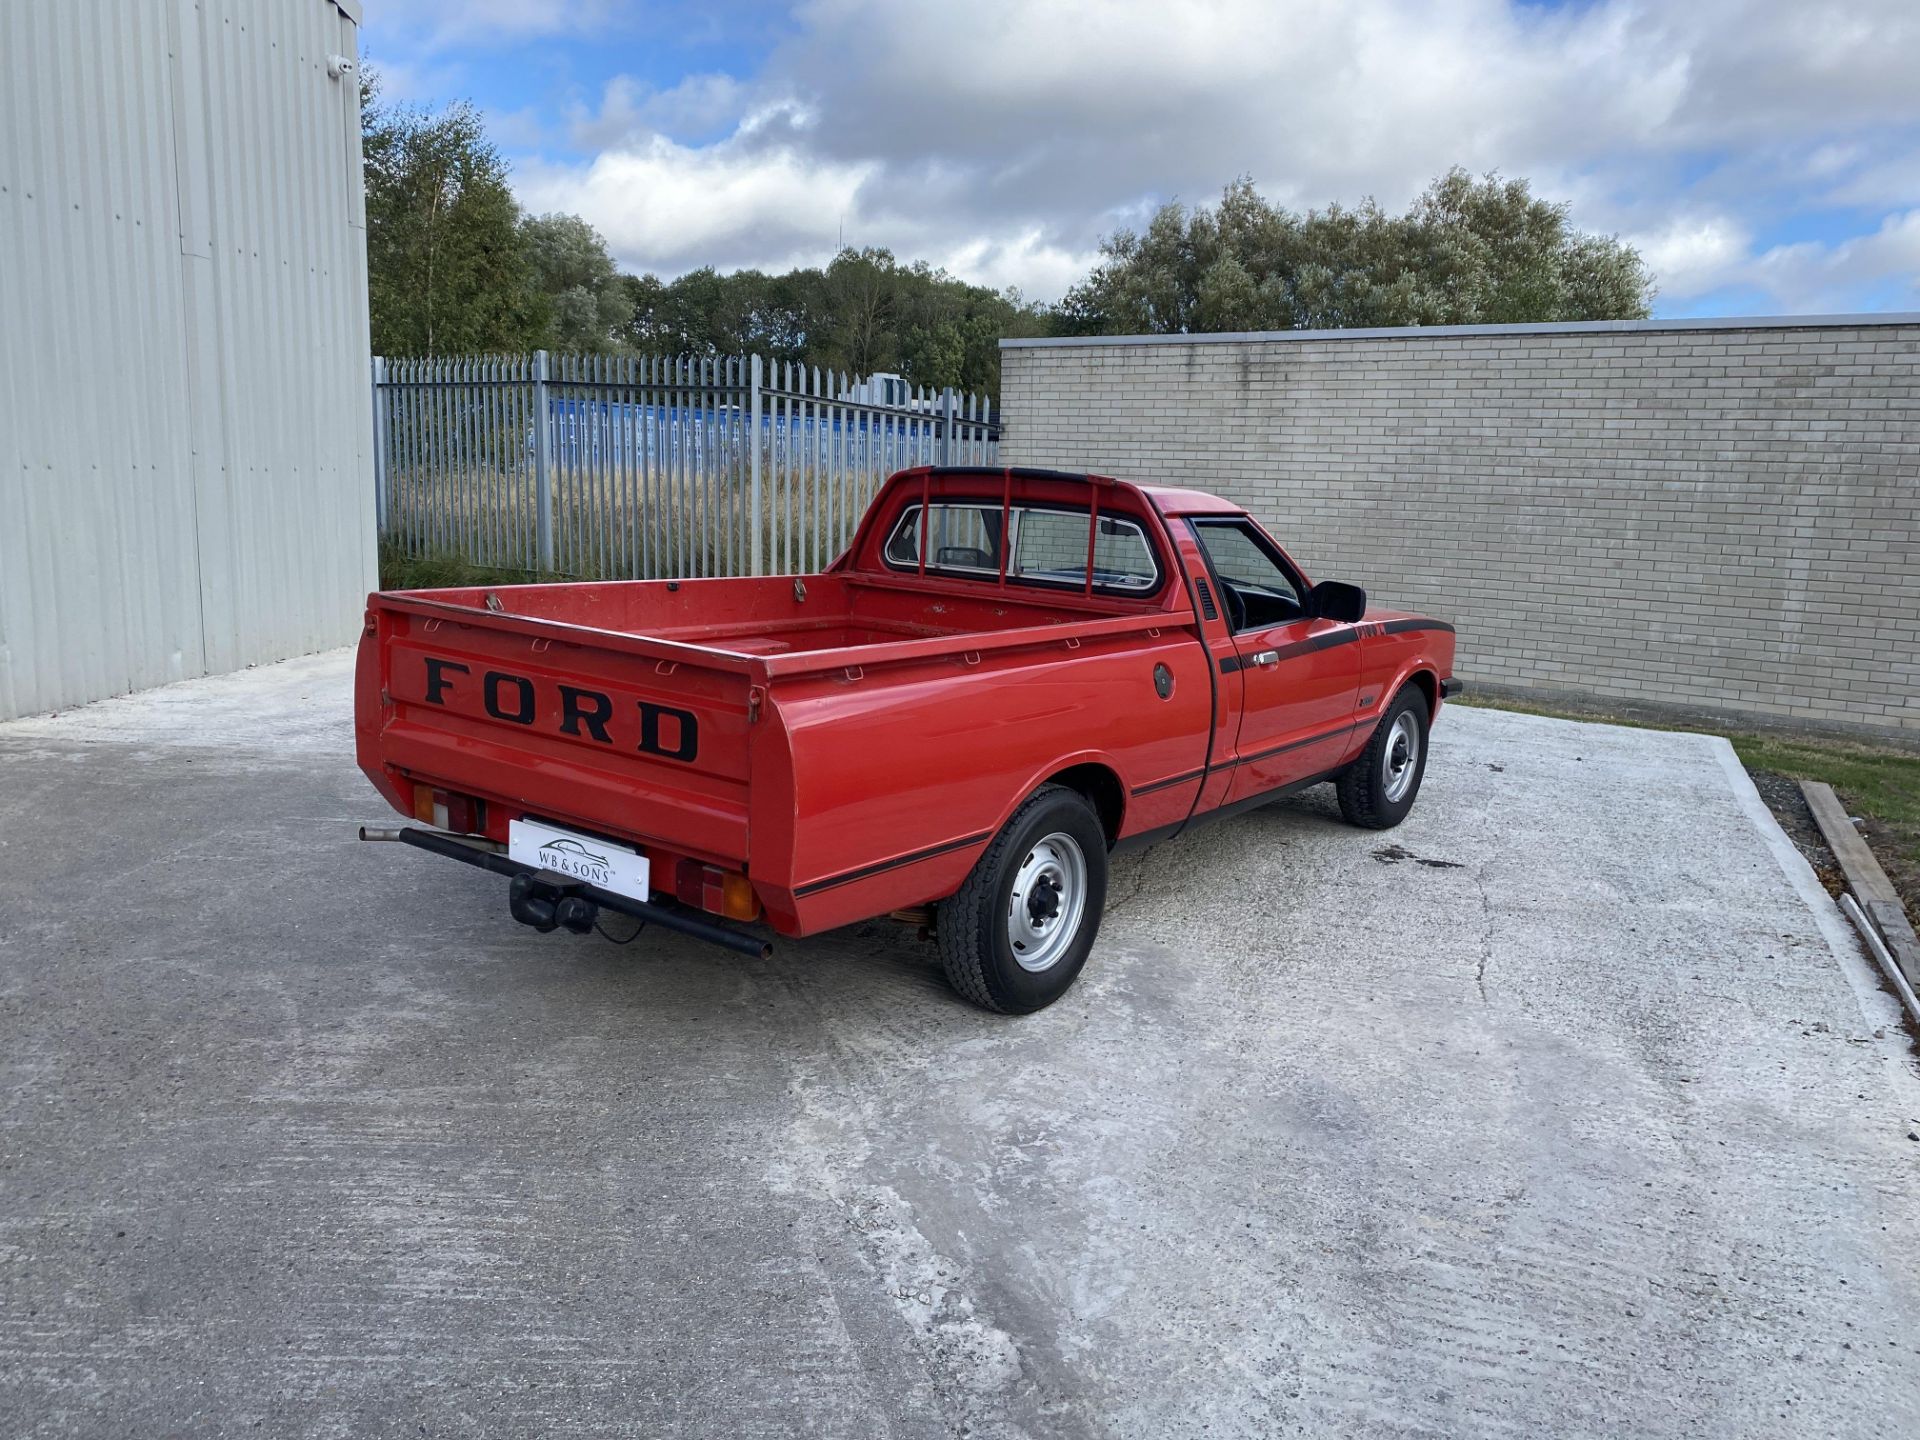 Ford P100 - Image 4 of 37